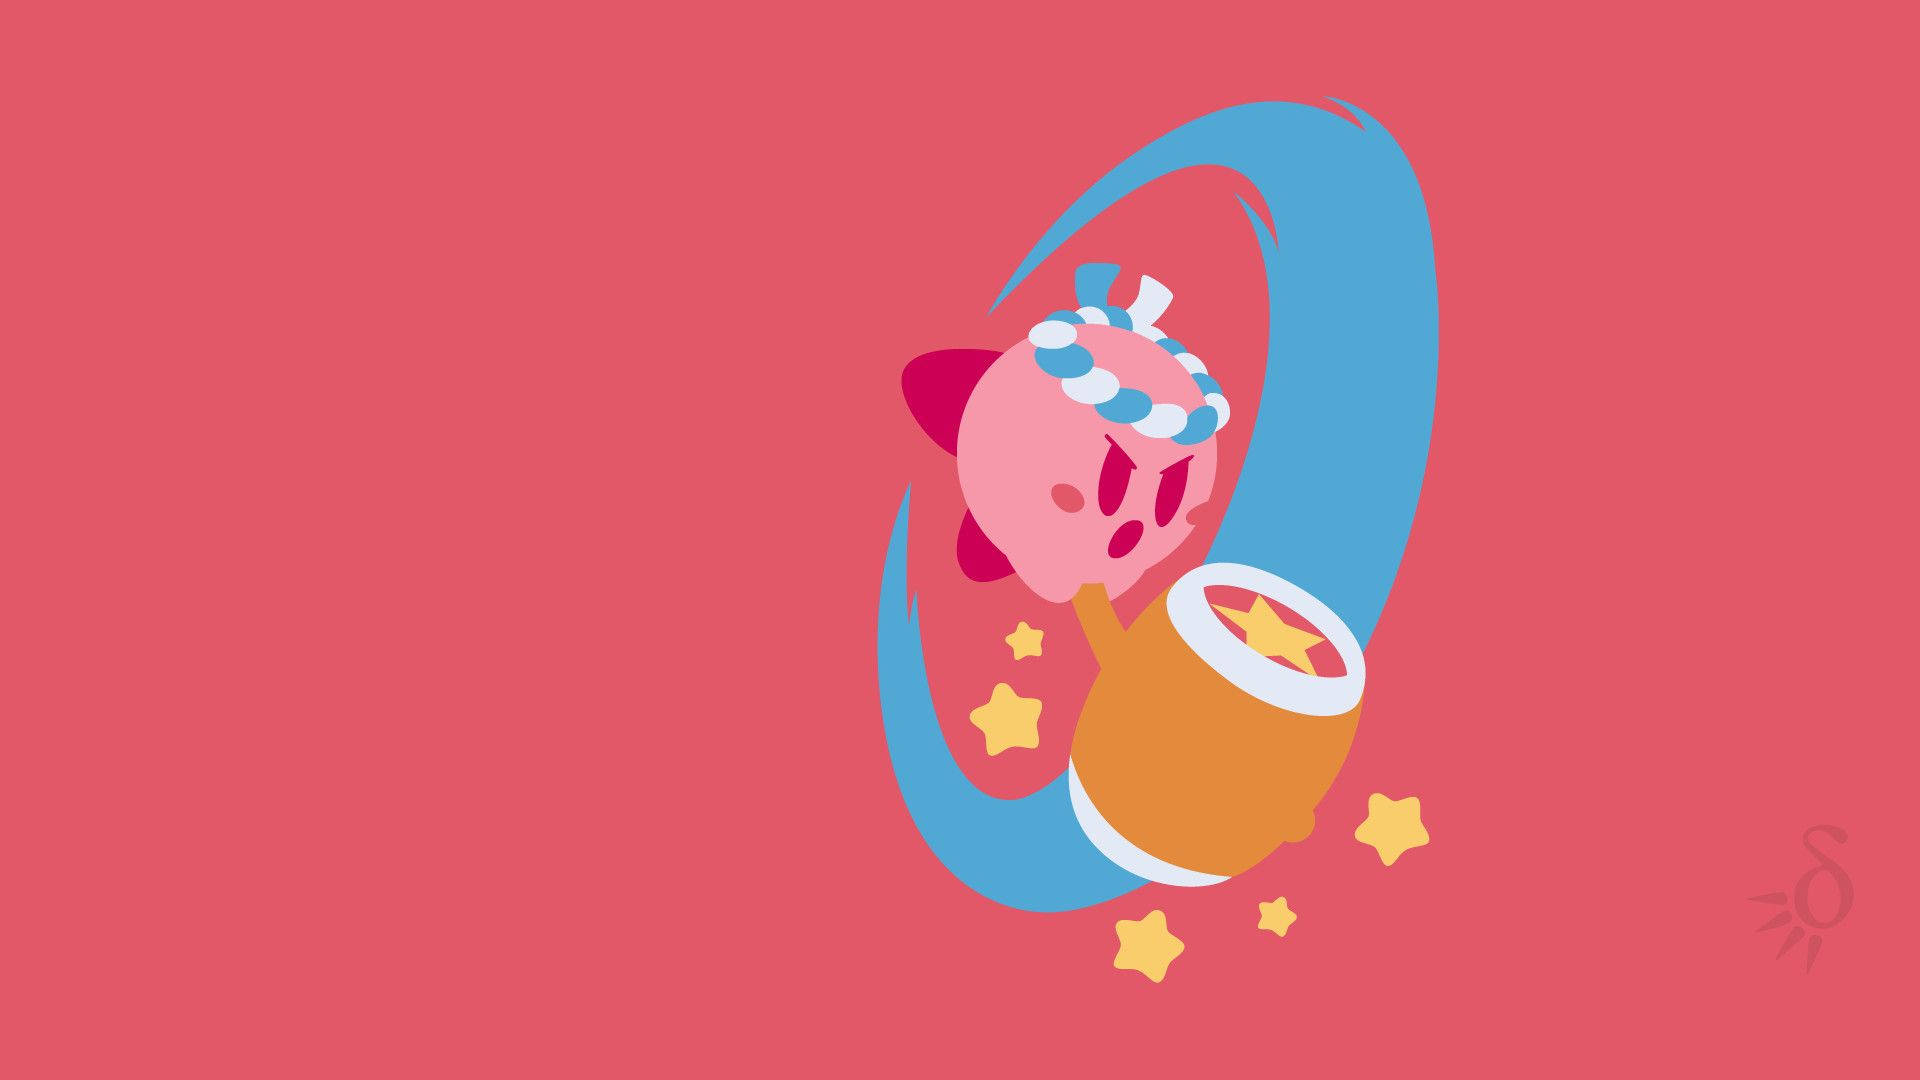 Awesome Pink Aesthetic Kirby Art Background